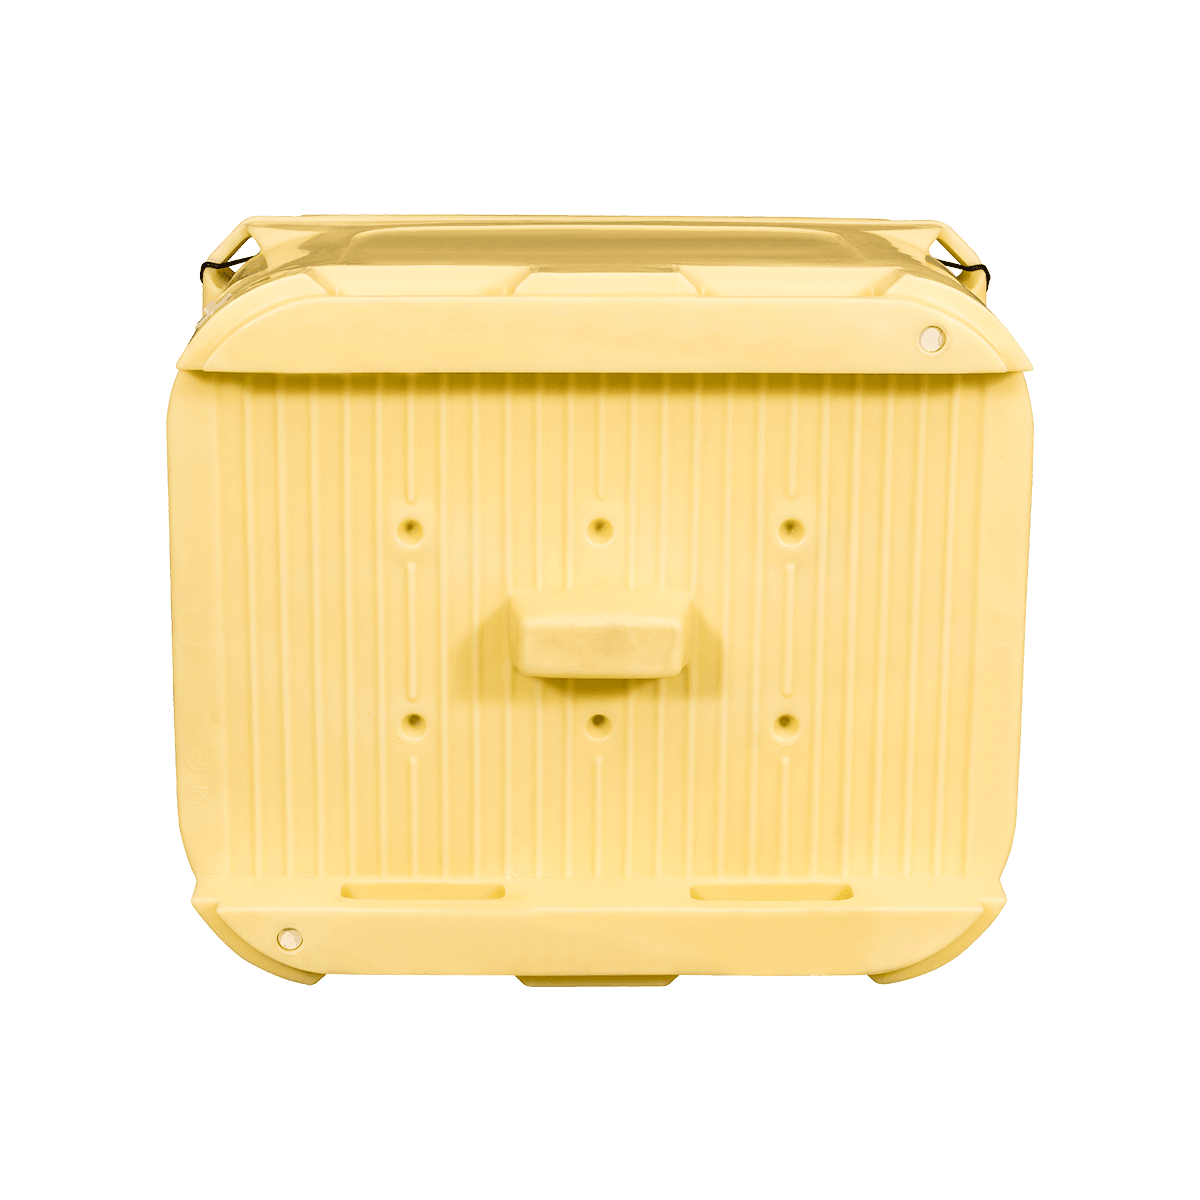 What Kind Of Insulated Seafood Containers Are More Popular?